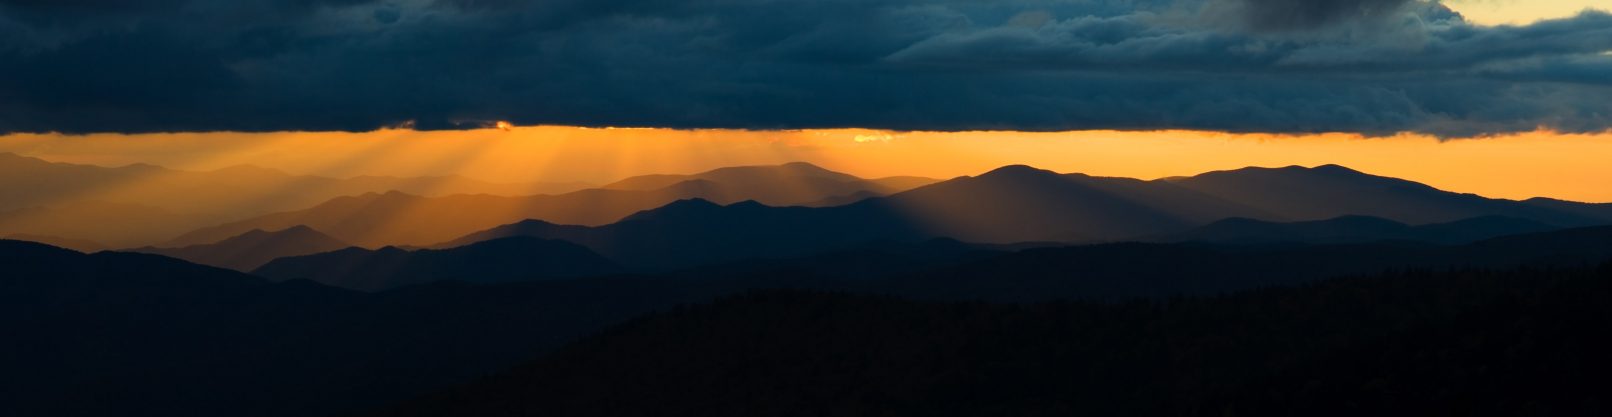 Sunset rays from clouds at Great Smoky Mountains